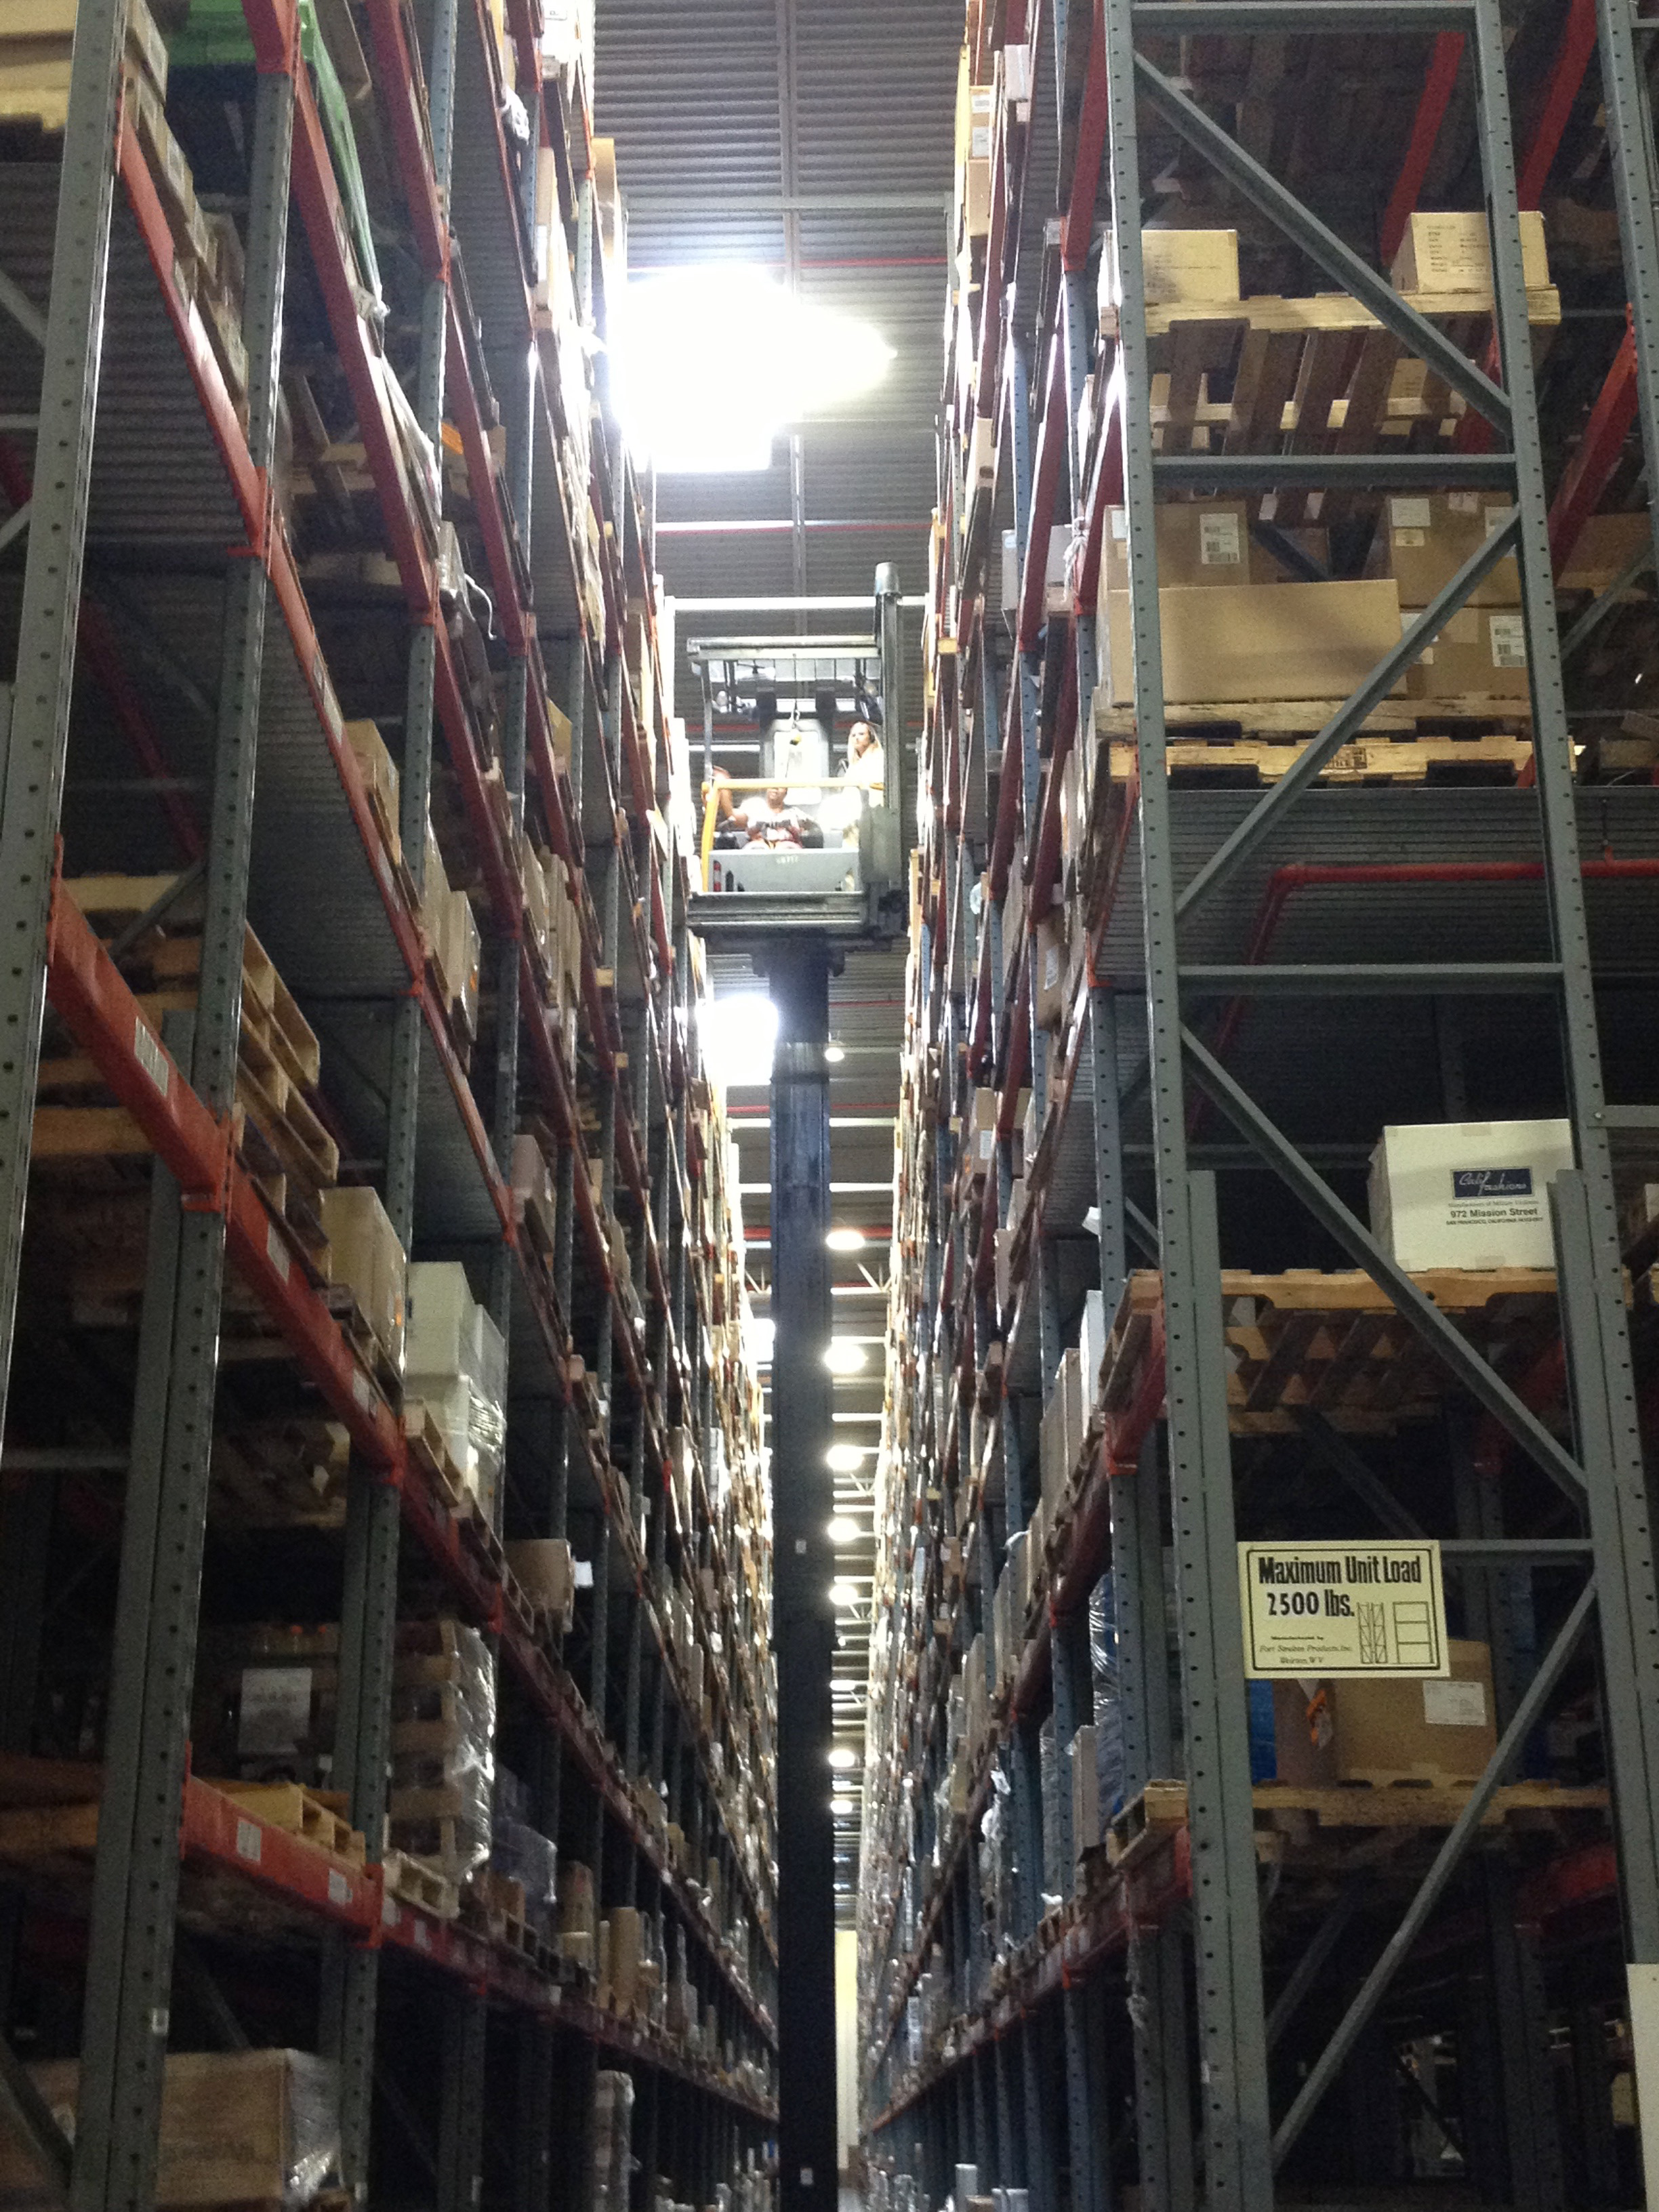 View from the top of the Automatic Storage Retrieval System